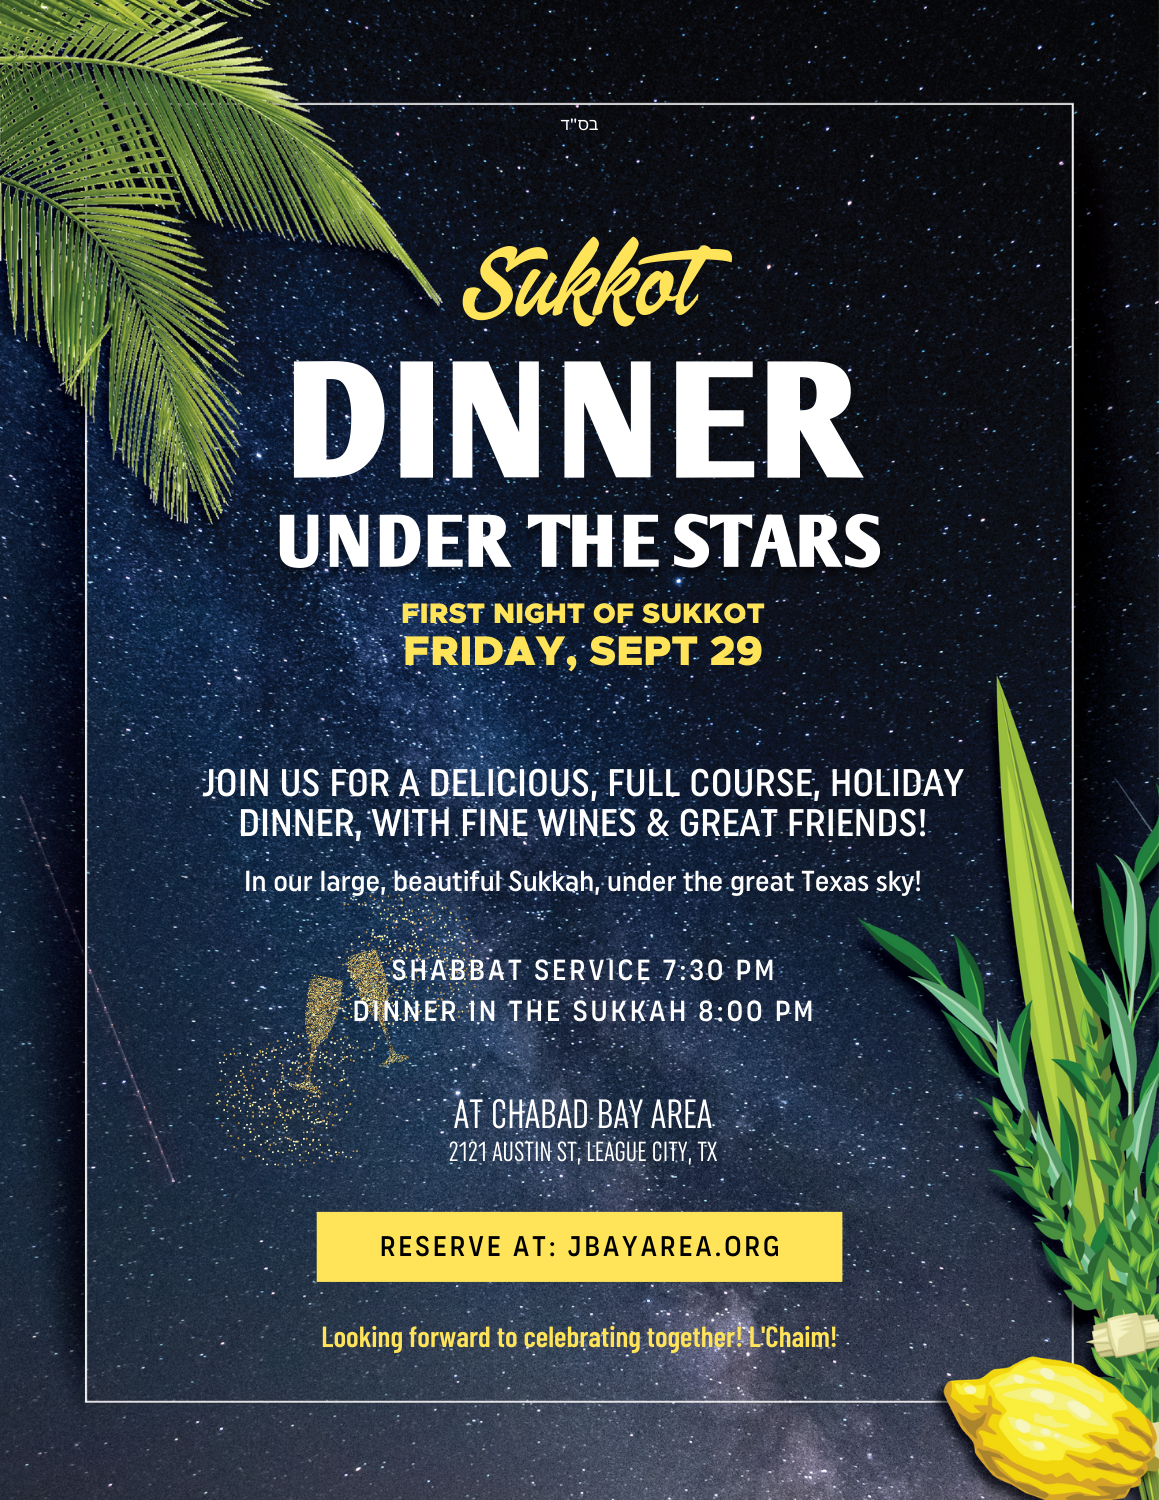 Blundering Into the Sukkah - Tablet Magazine